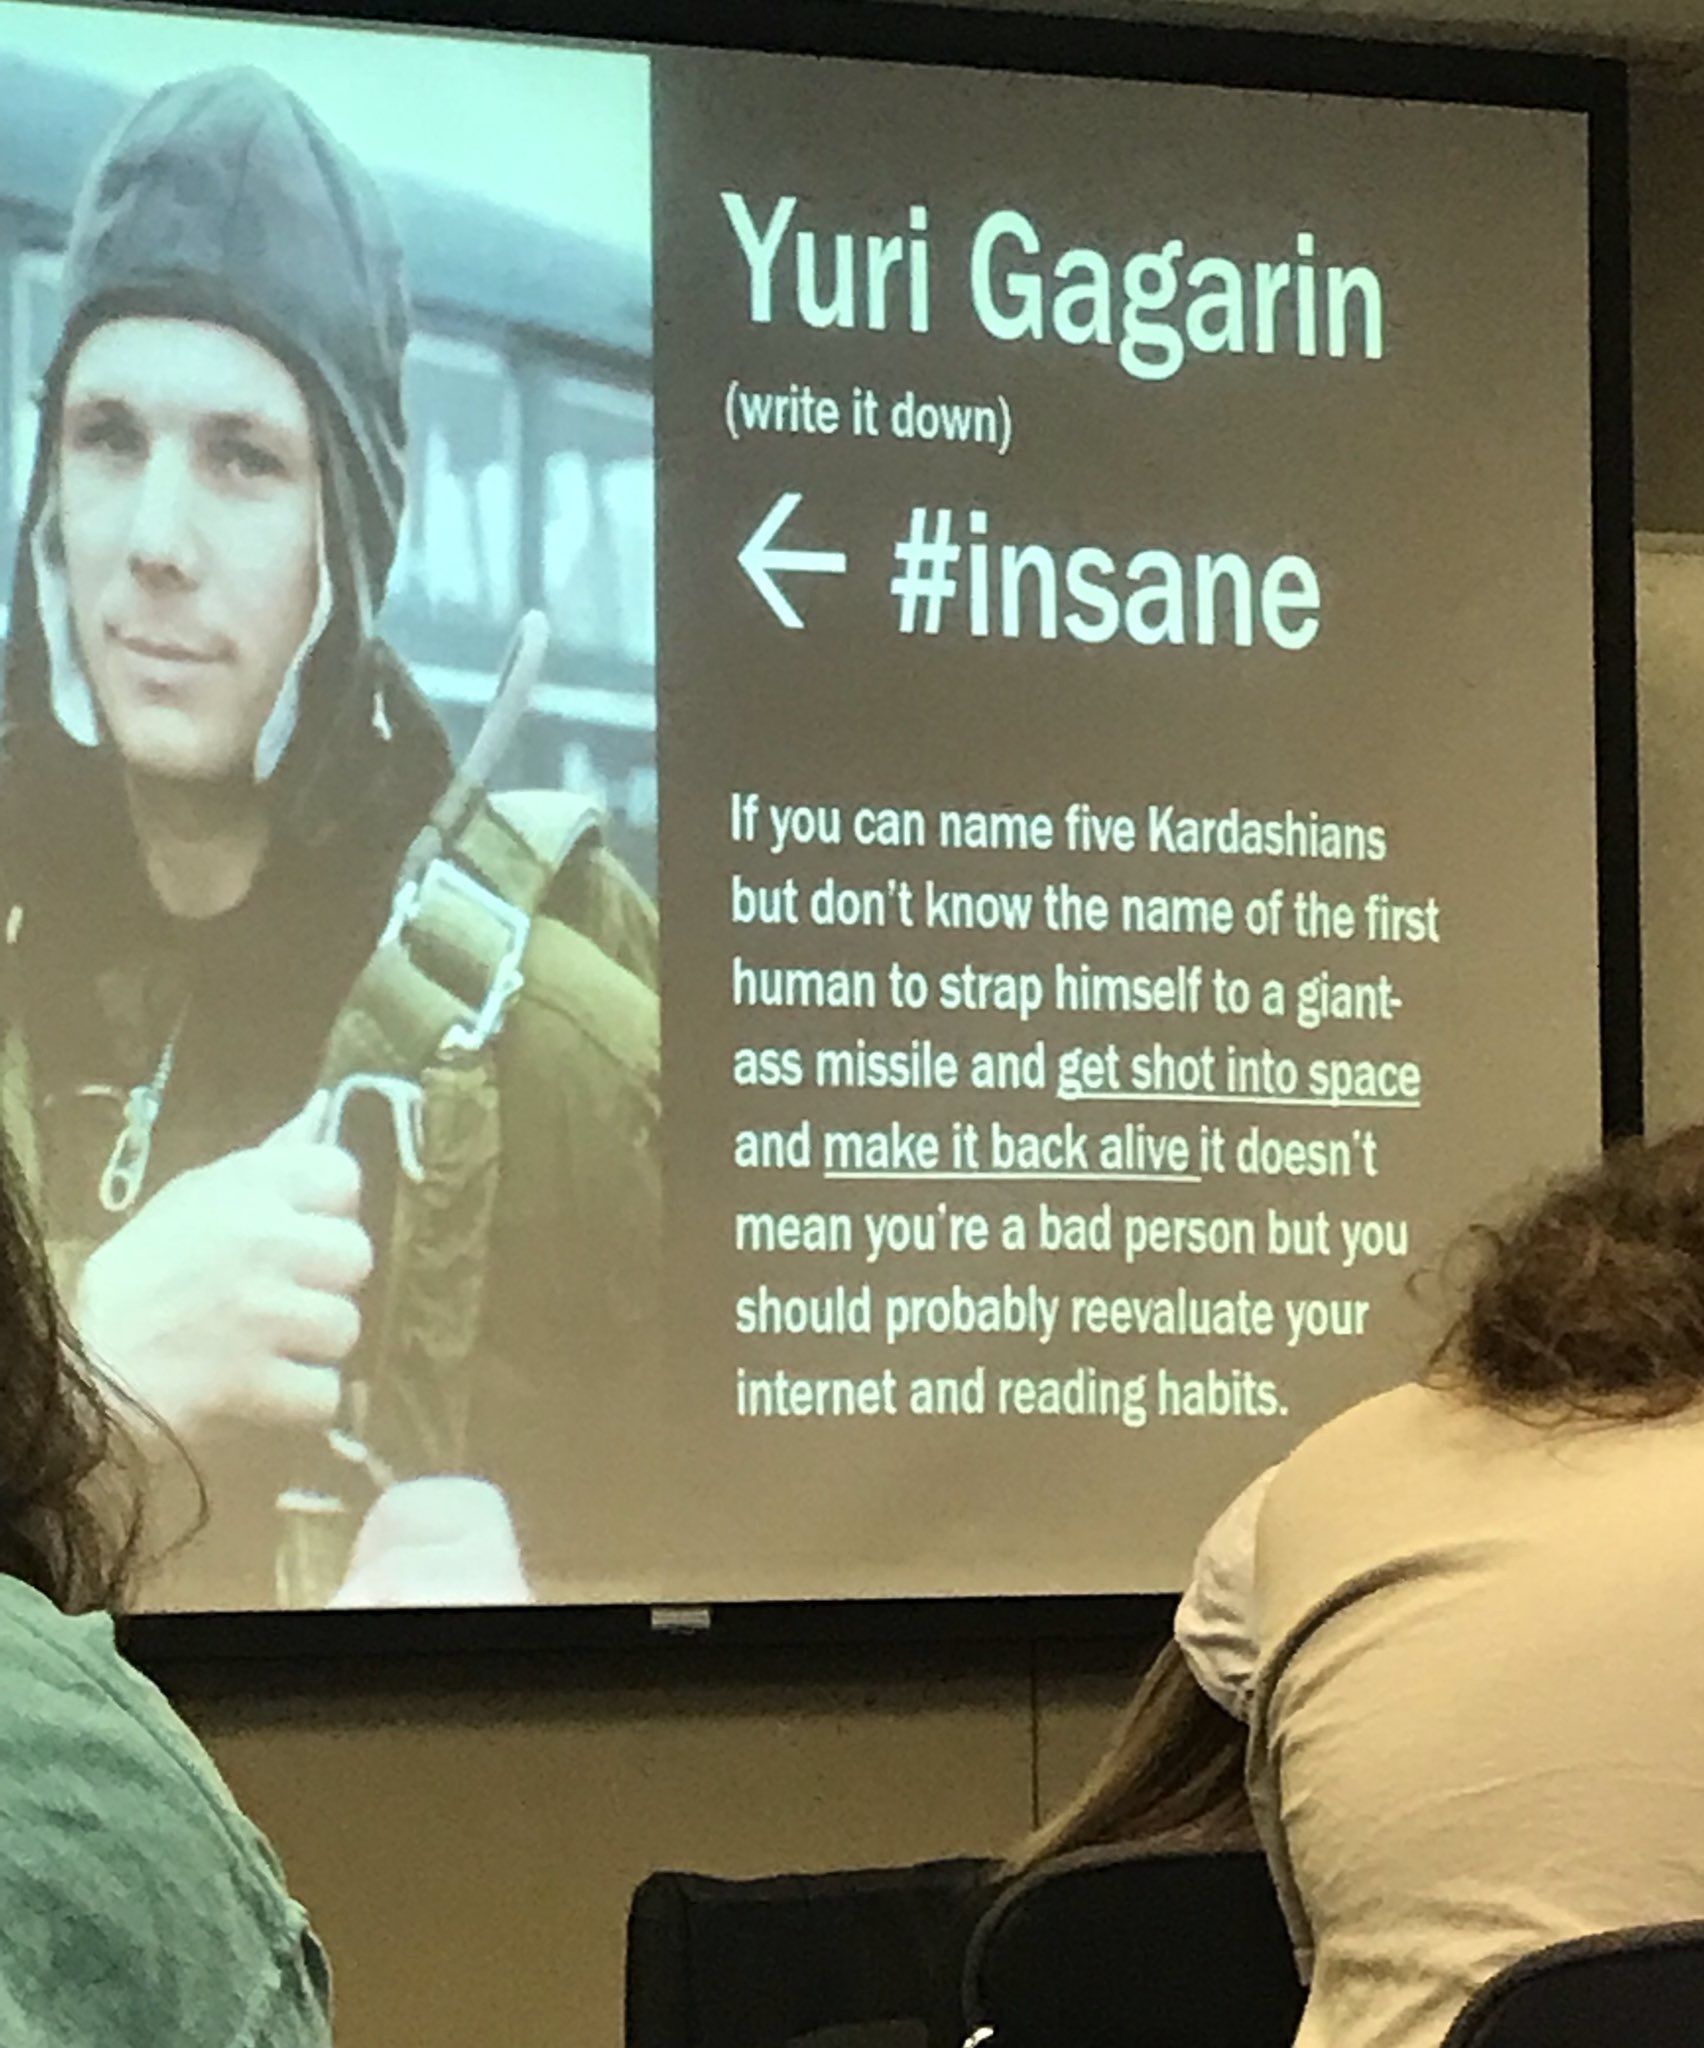 History professor teaches about the first man in space.